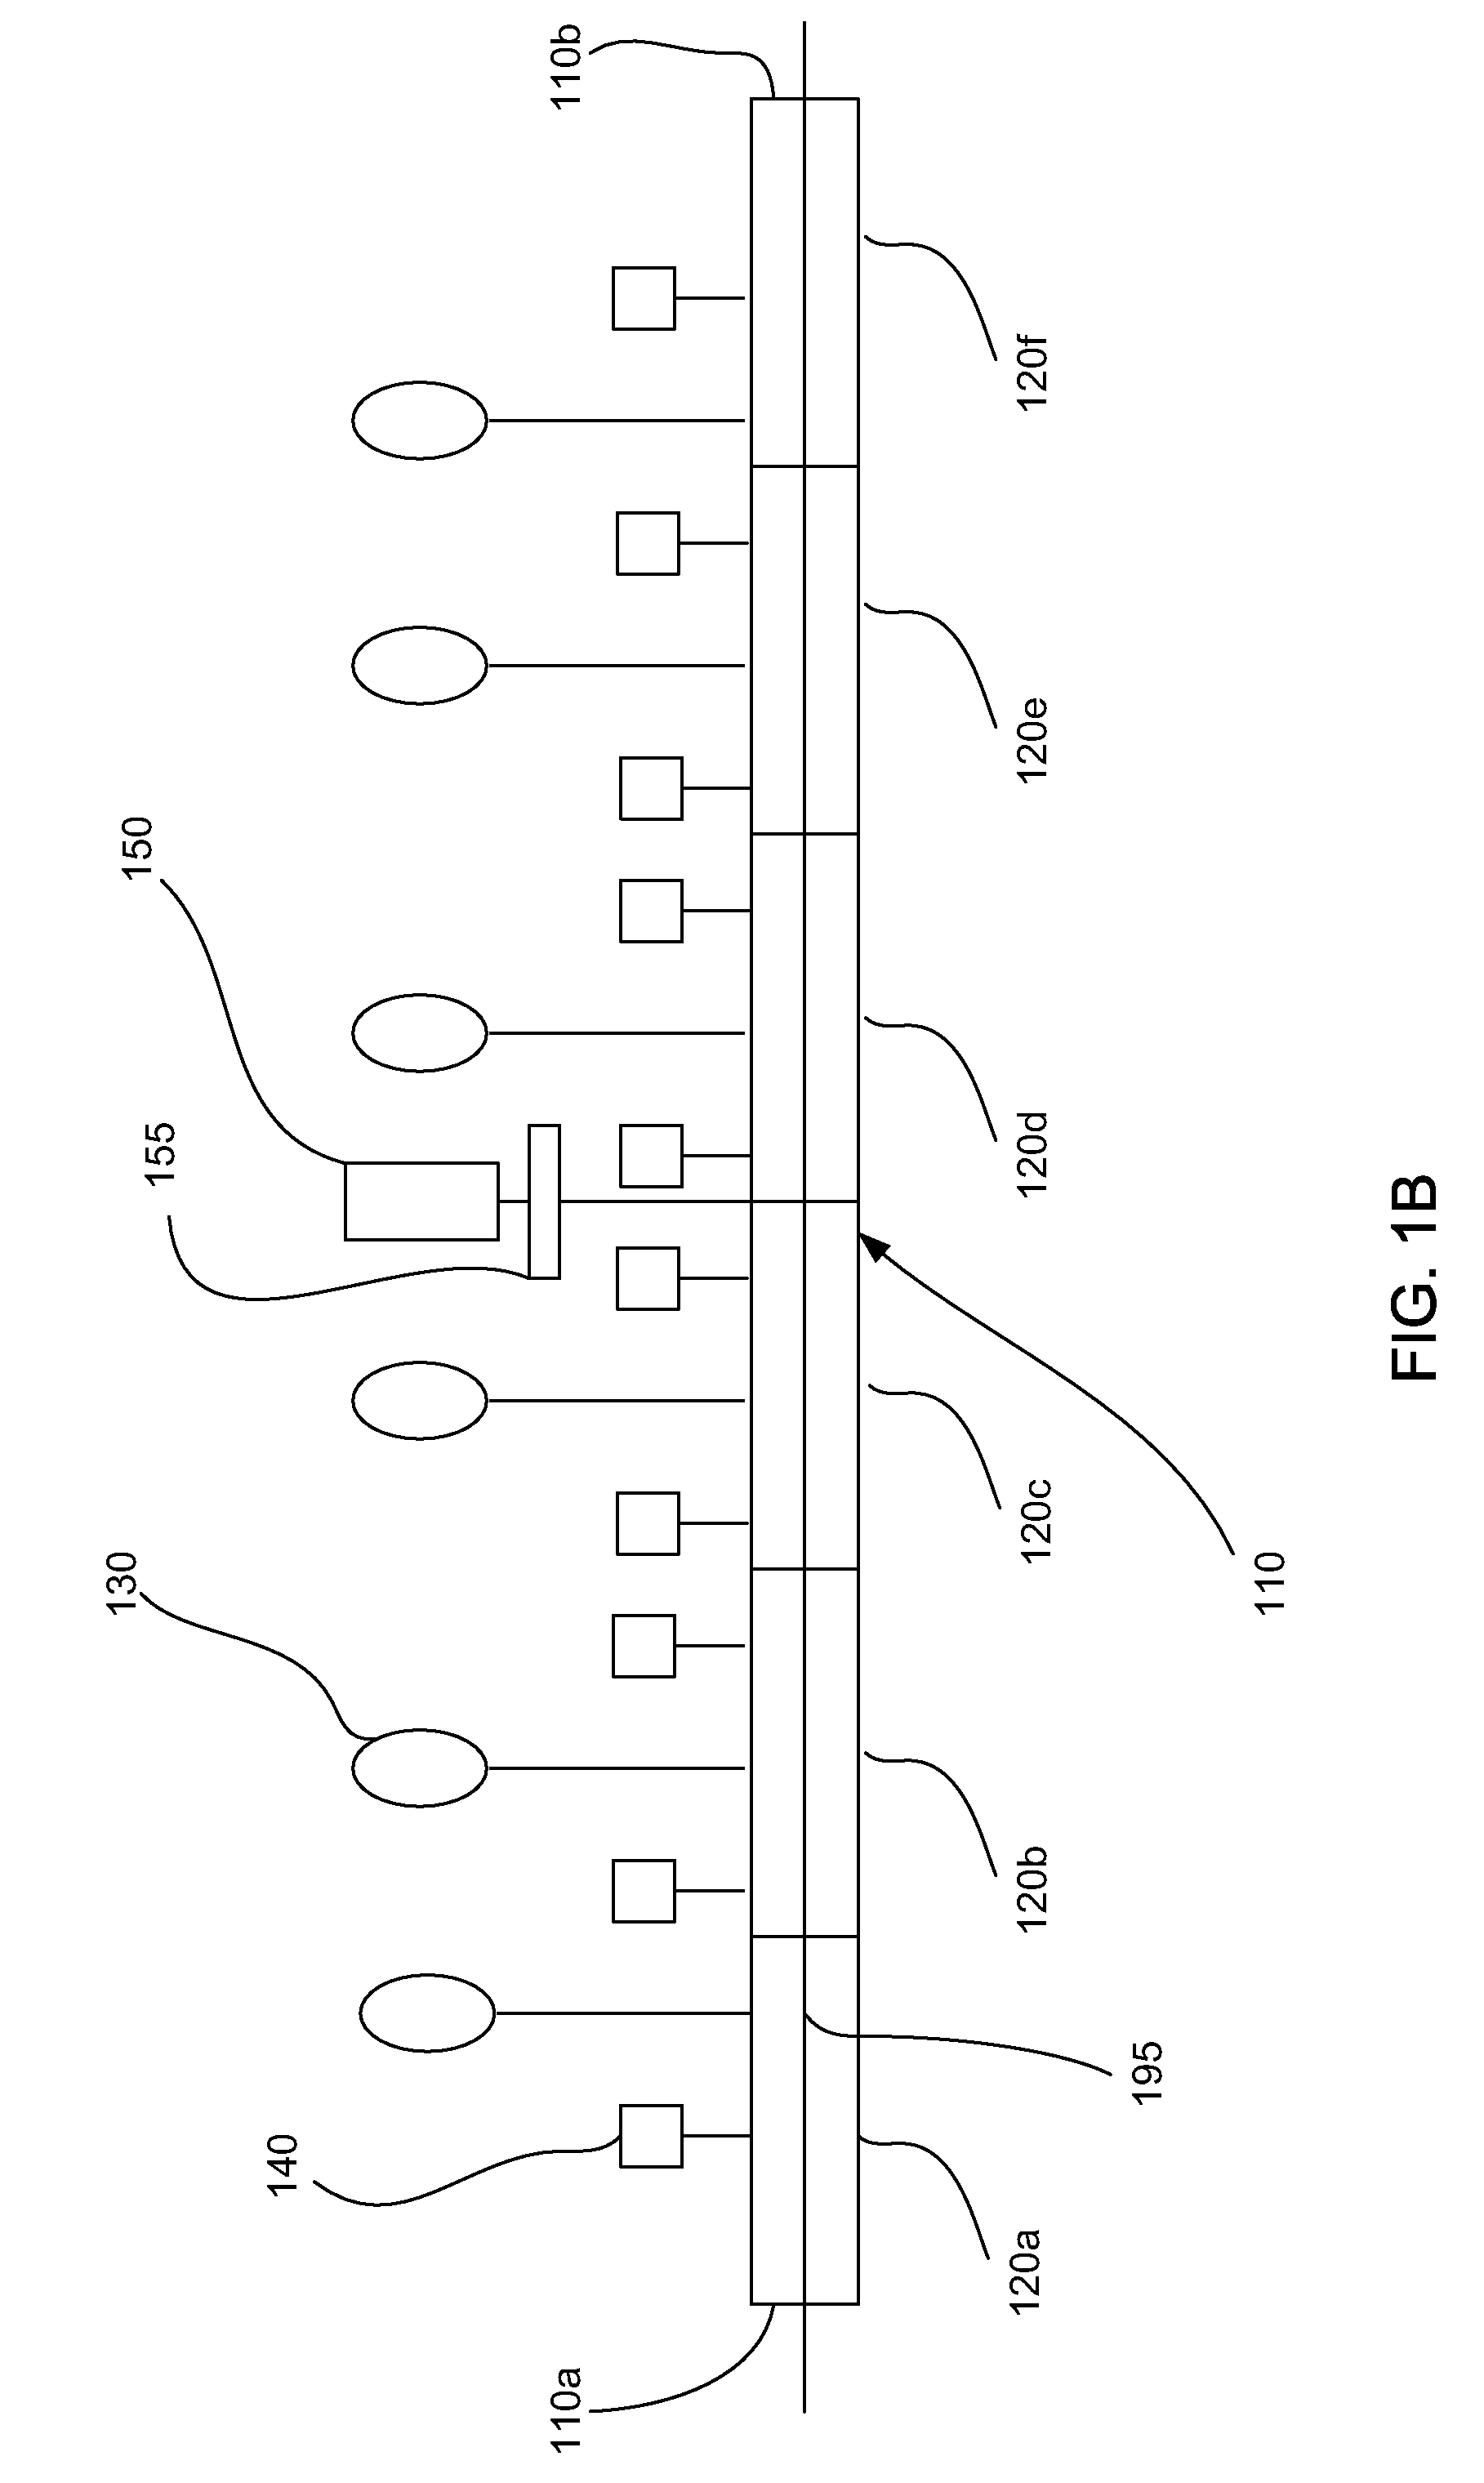 System for measuring acoustic signature of an object in water